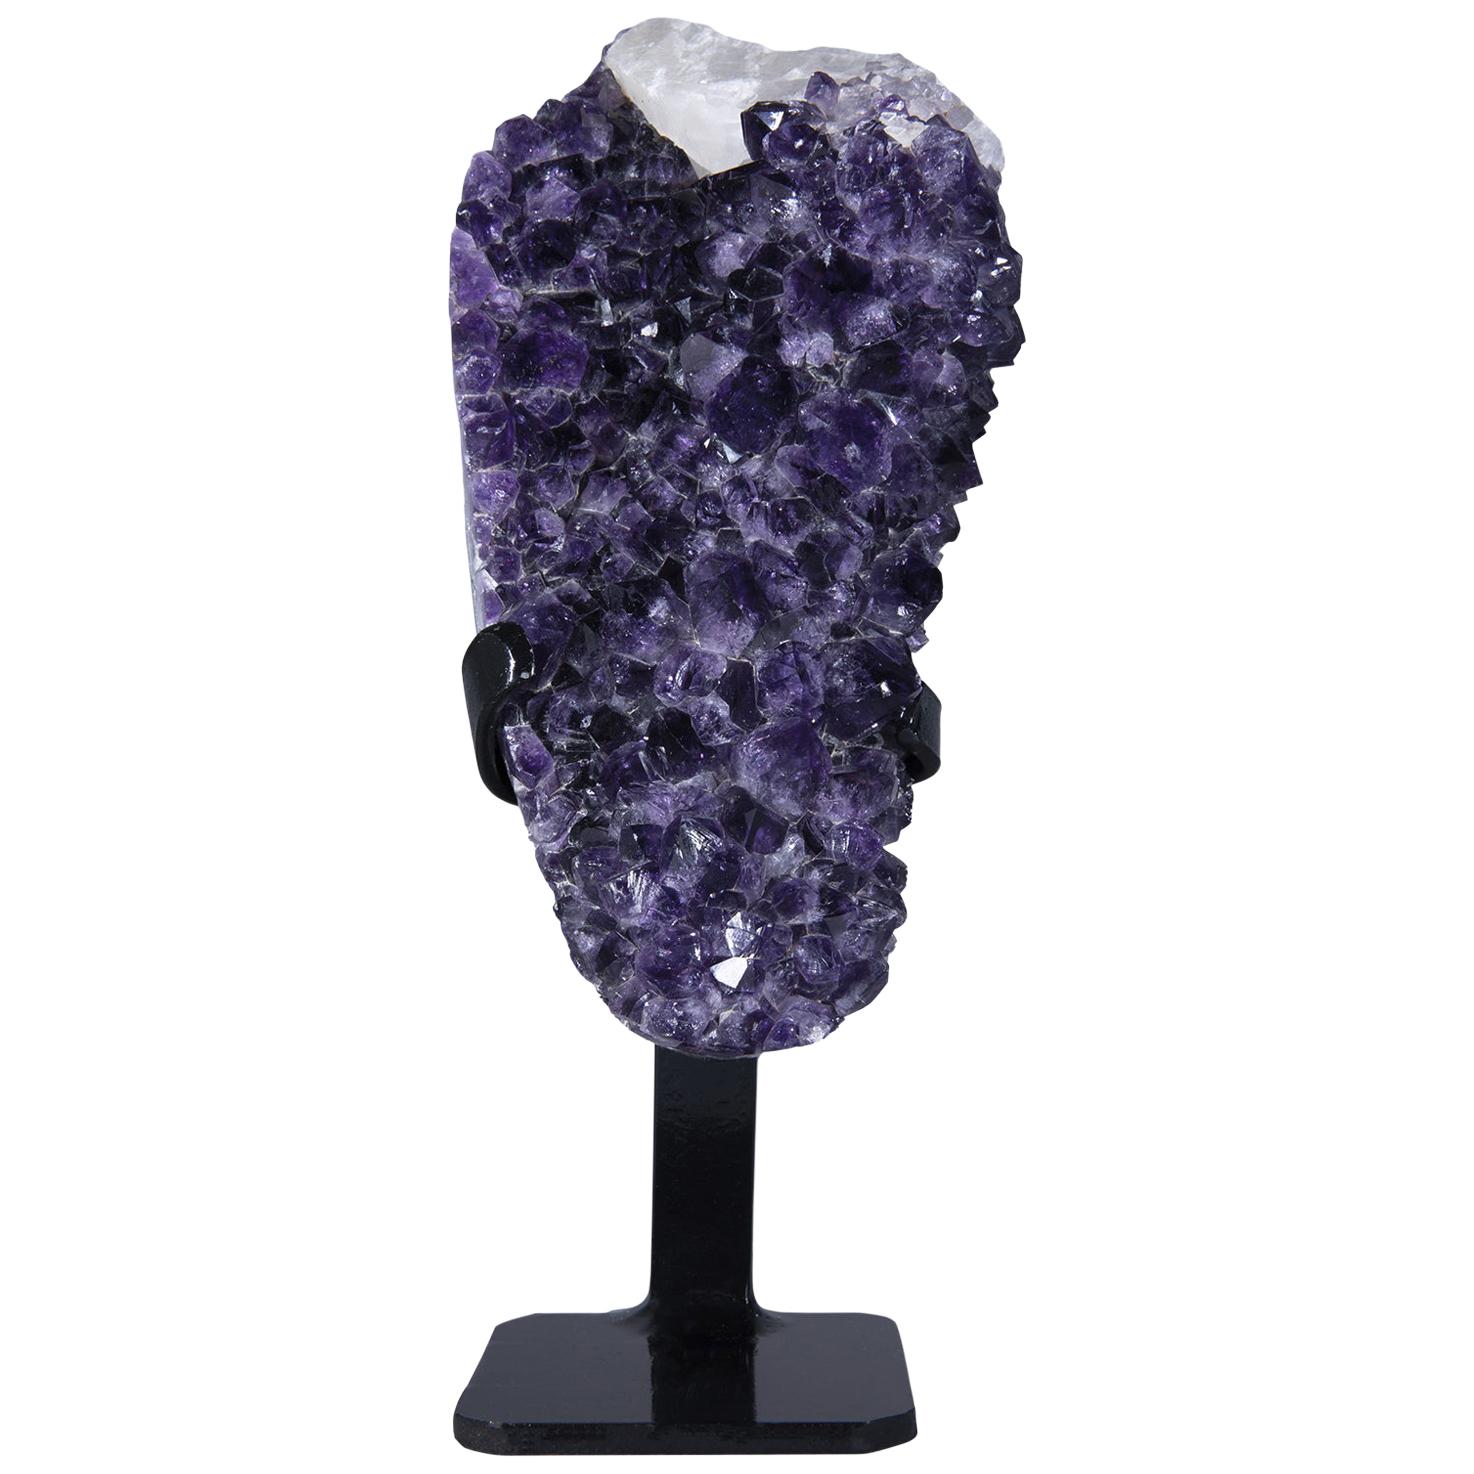 Amethyst Cluster with Calcite Formation, White Quartz and Green Celadonite